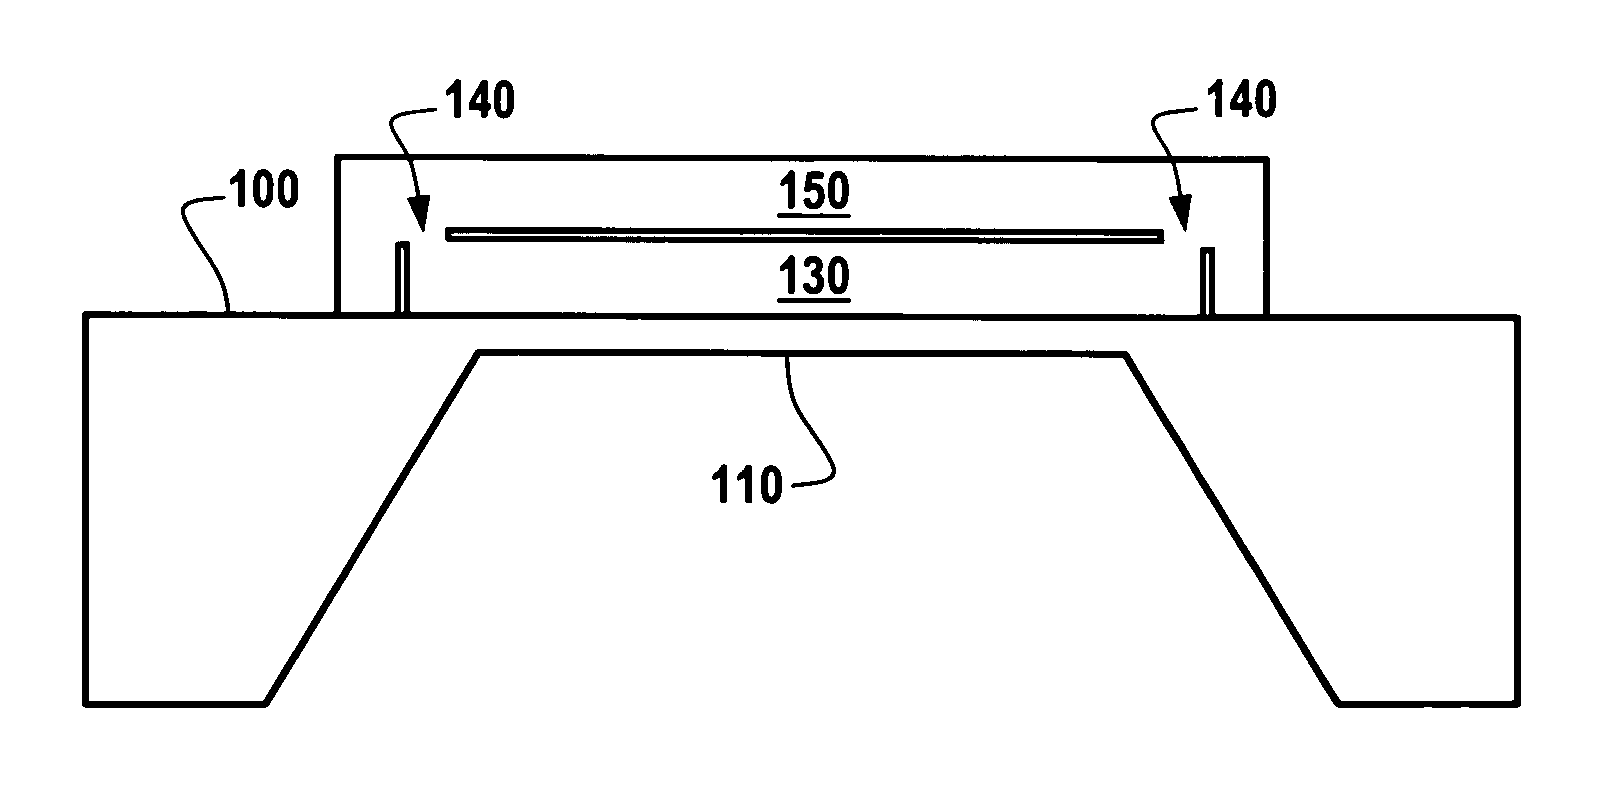 Top side reference cavity for absolute pressure sensor